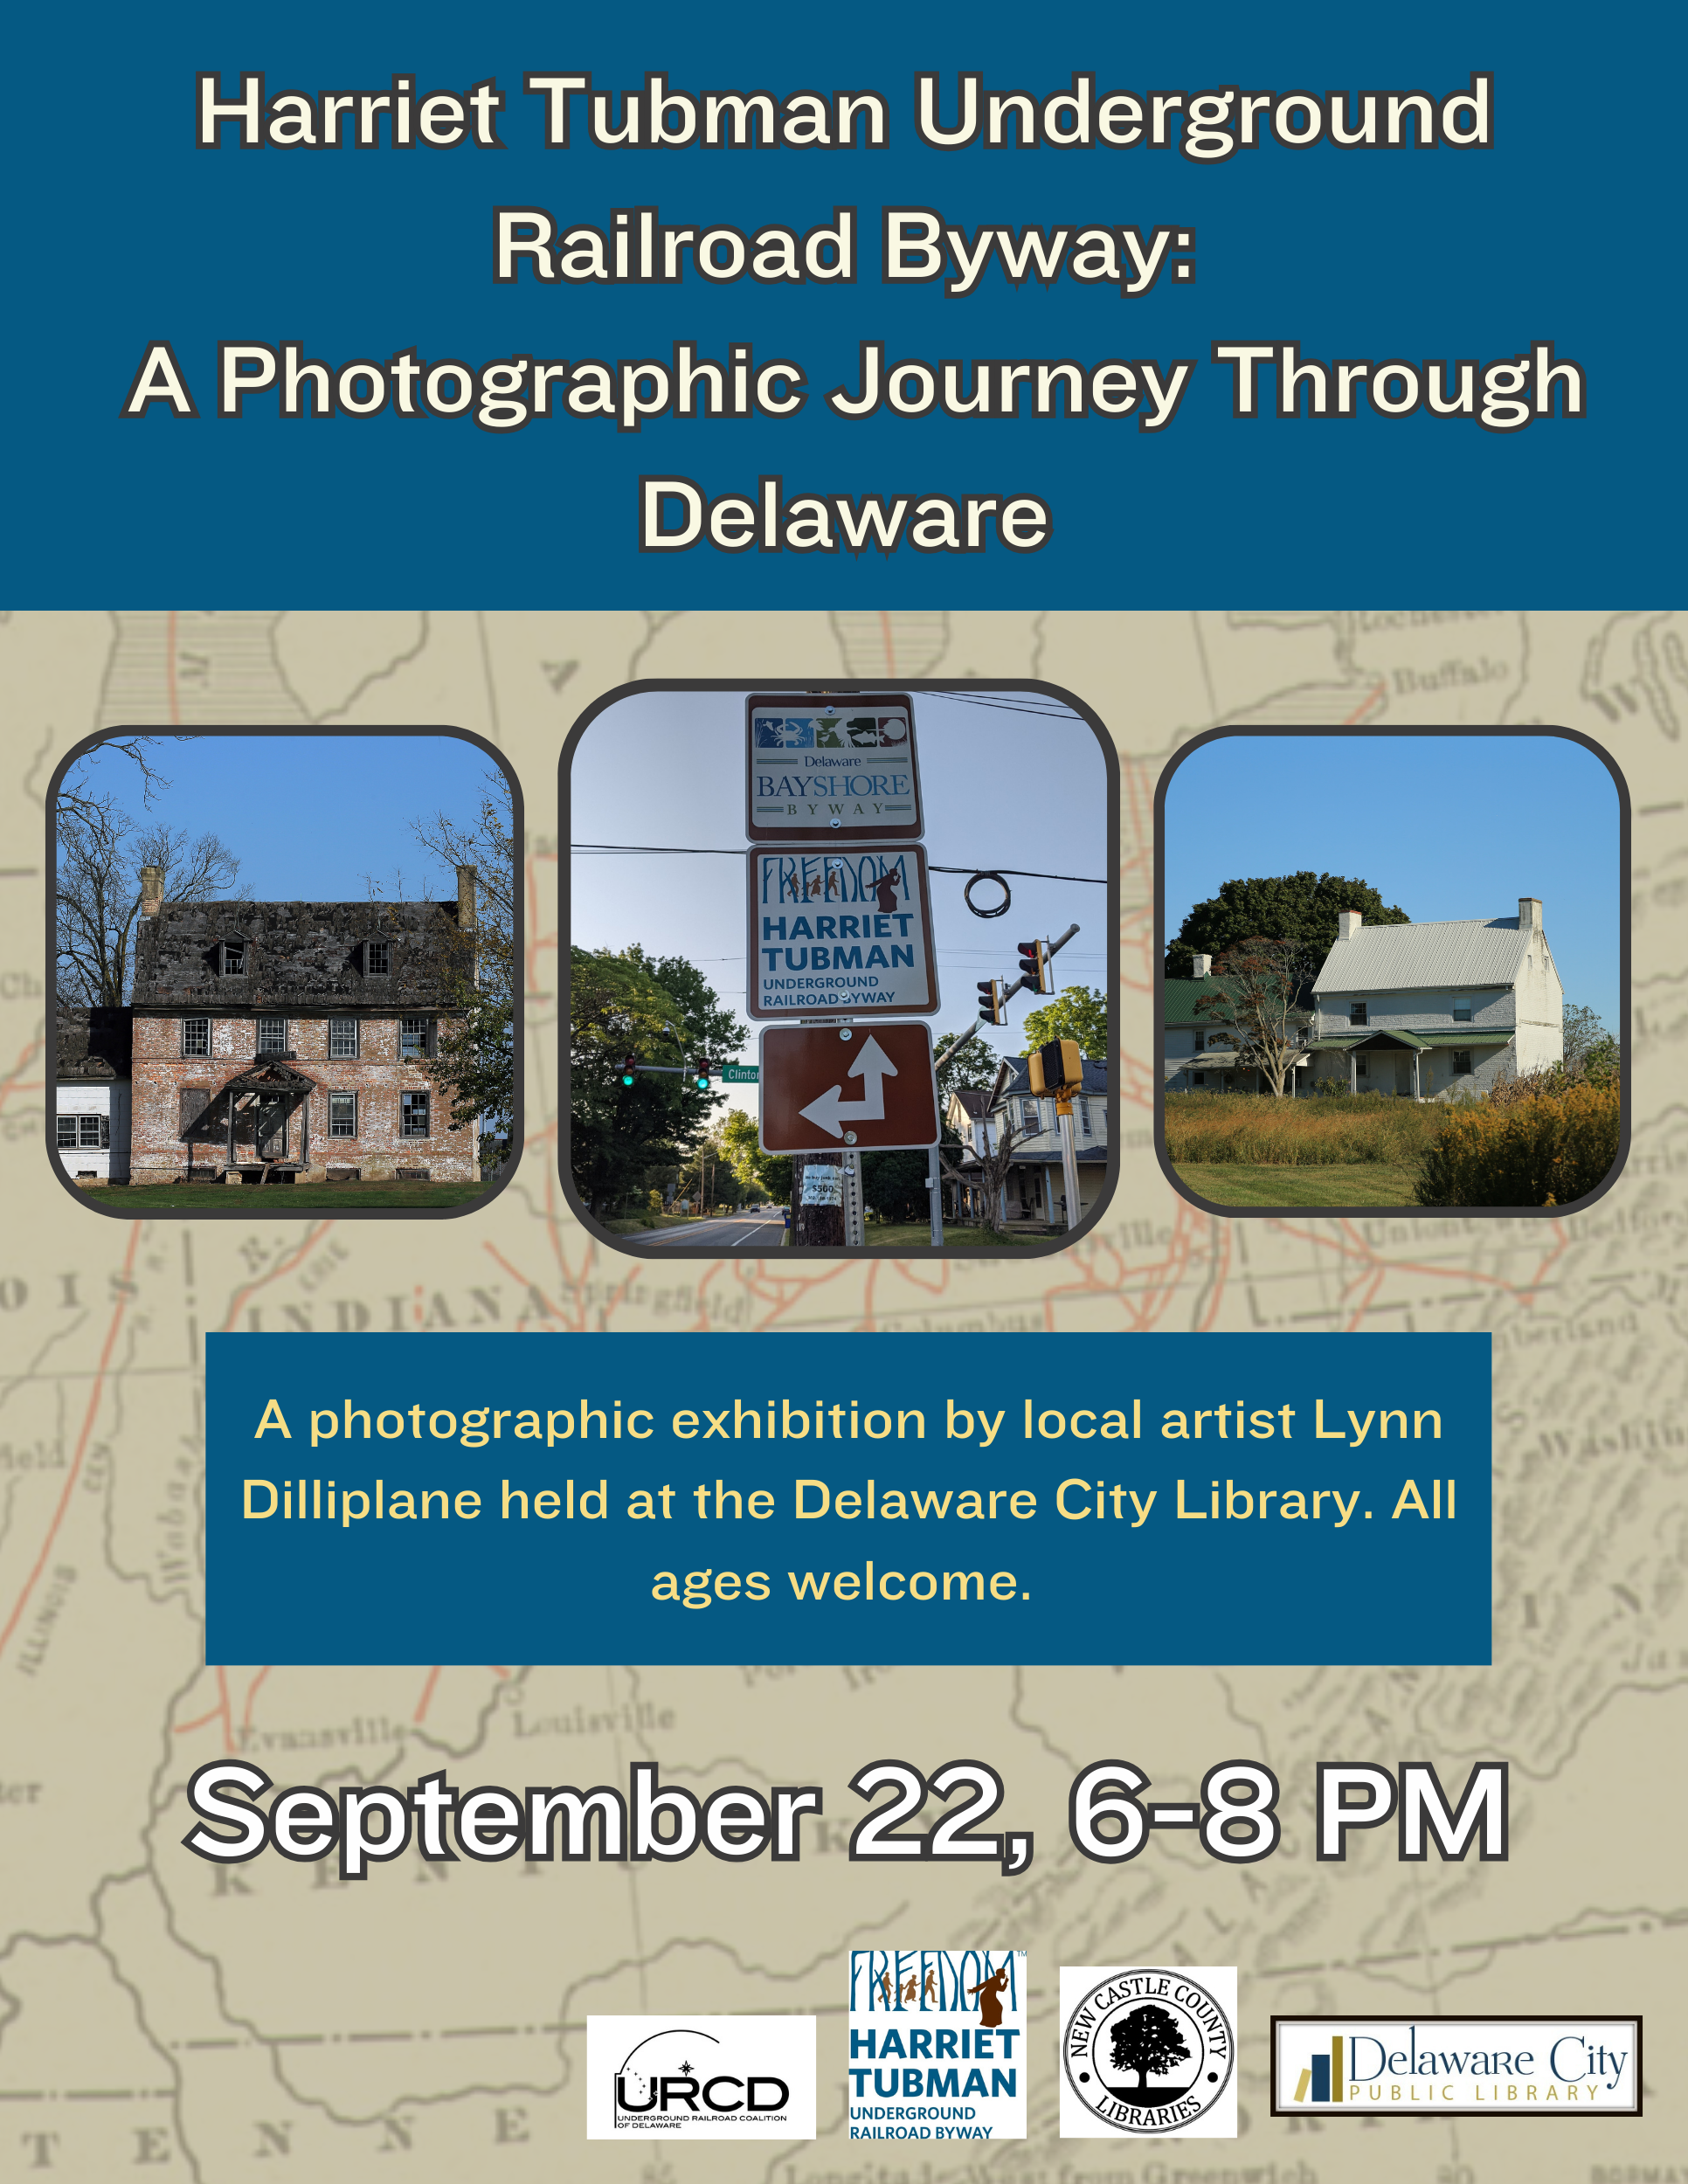 Celebrate International Underground Railroad Month with a photographic journey of the Harriet Tubman Underground Byway